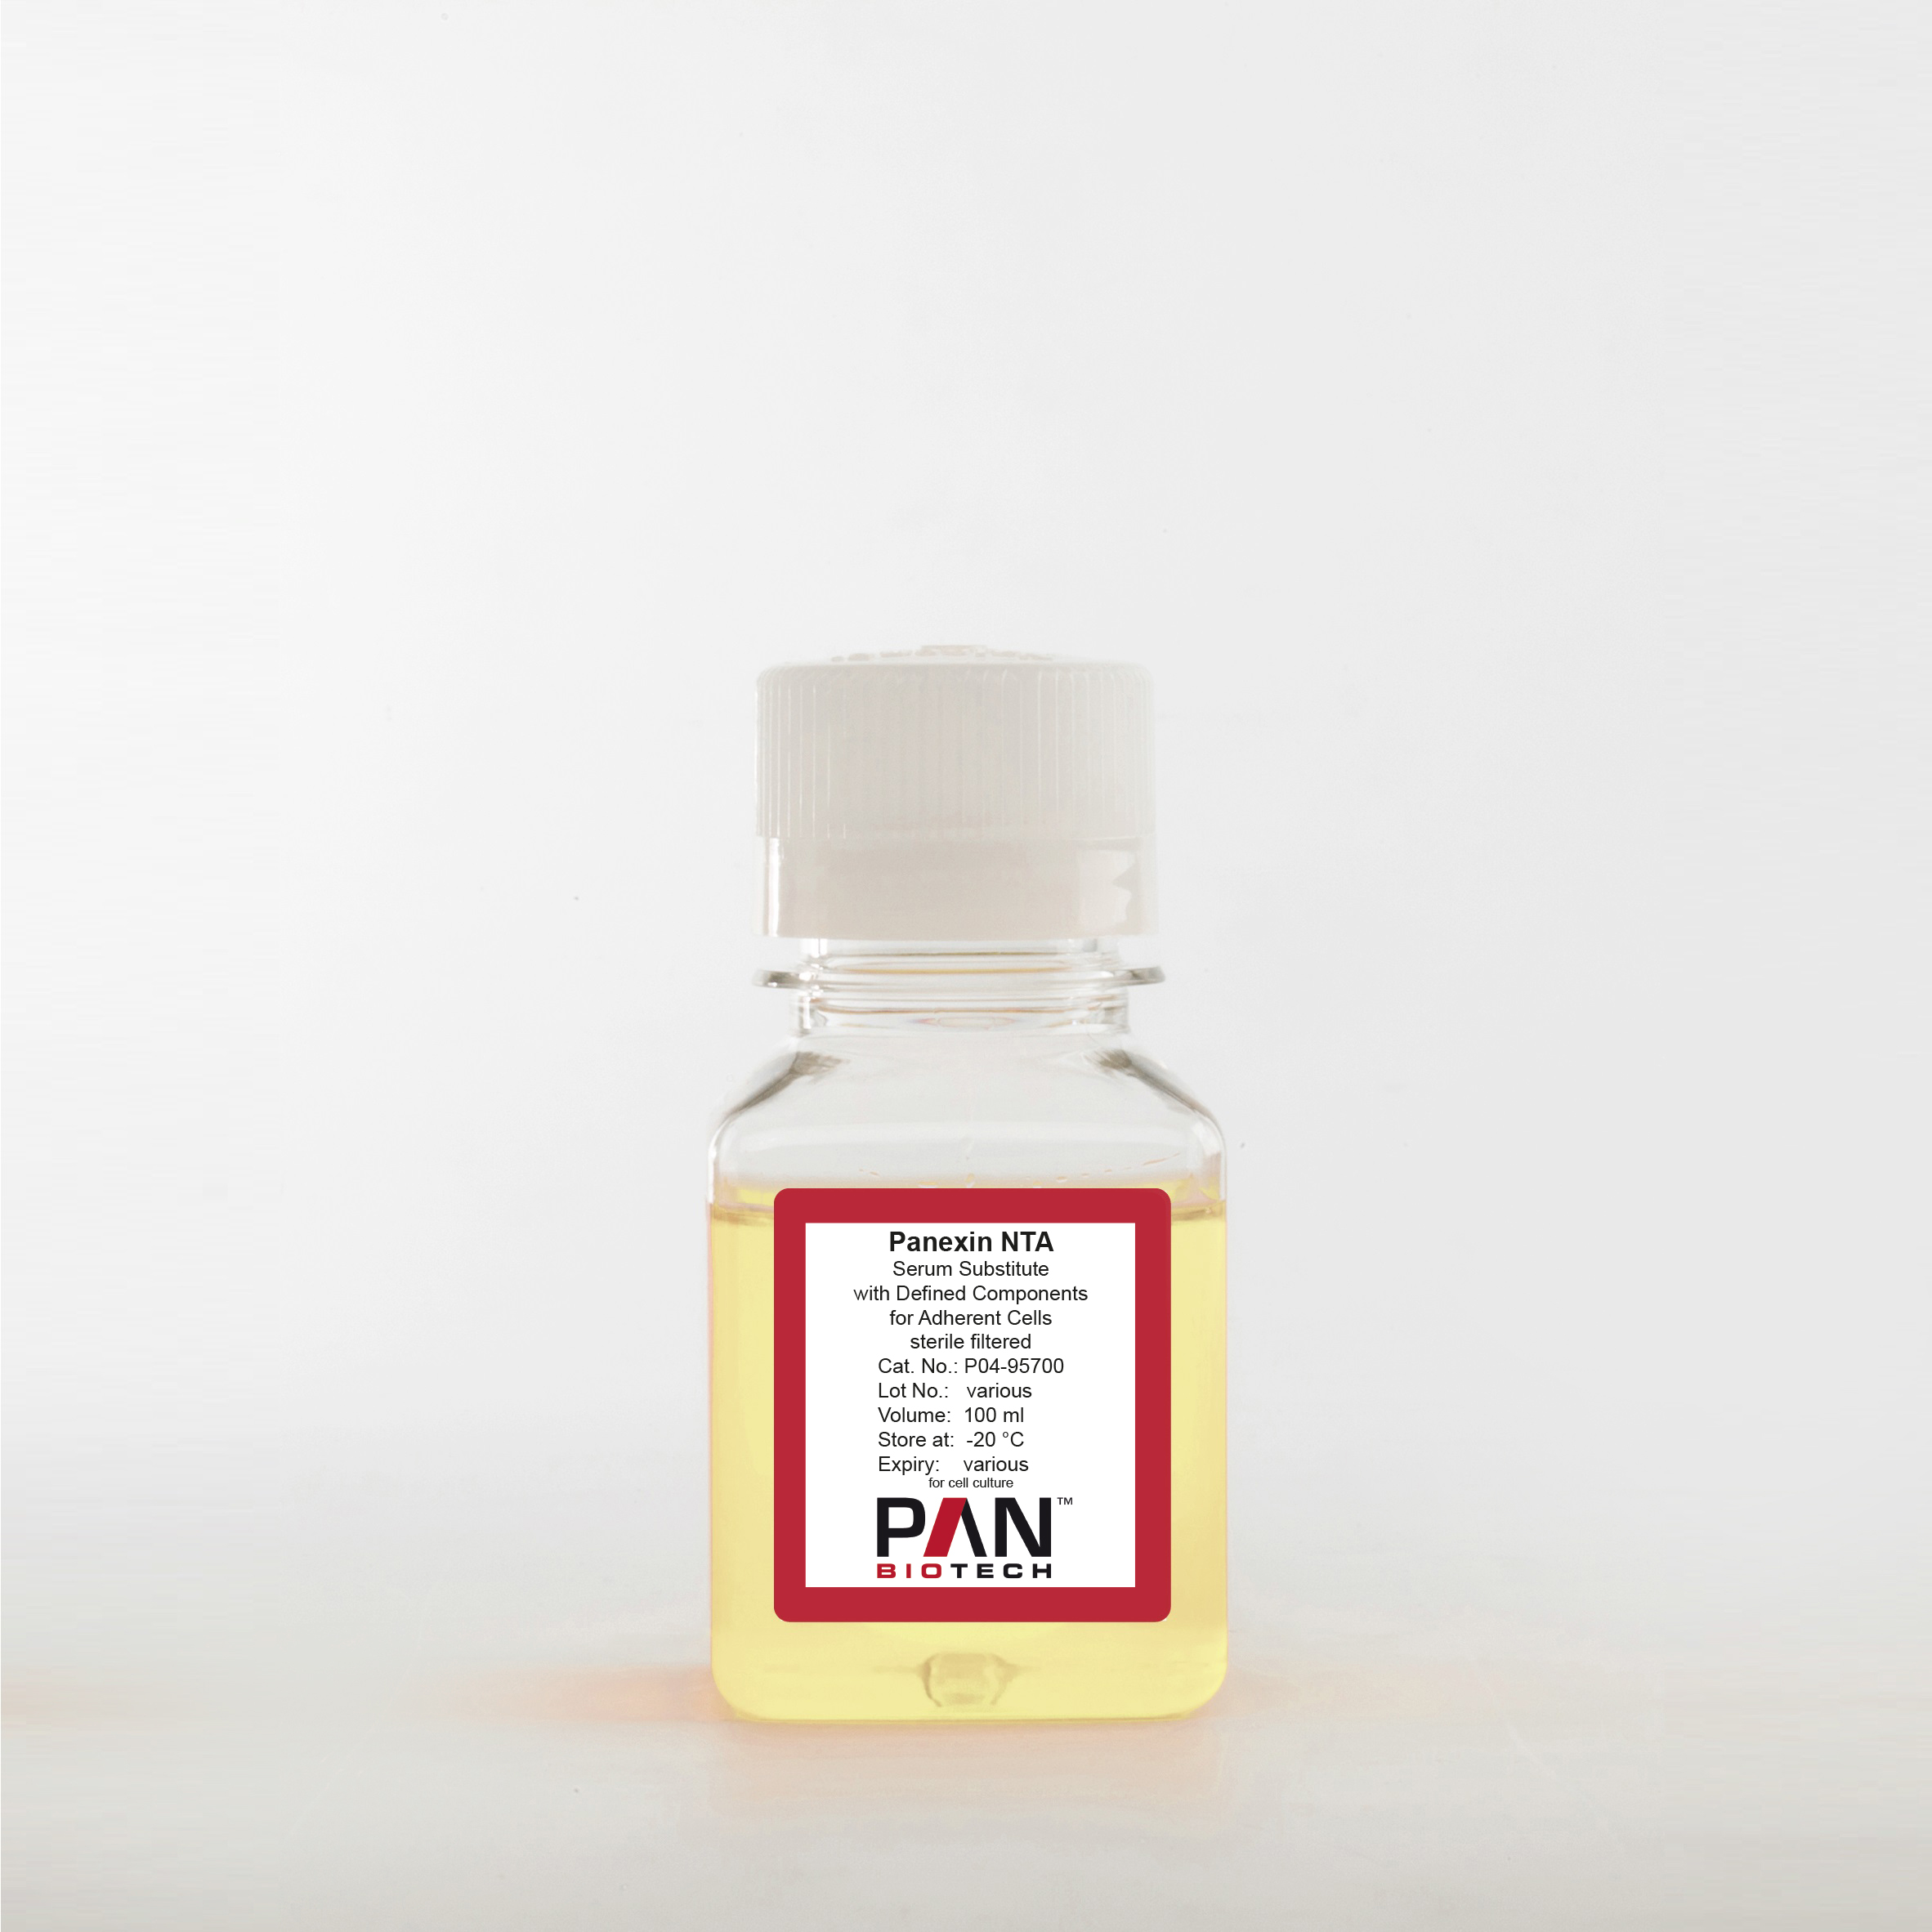 Panexin NTA Serum Substitute with Defined Components for Adherent Cells